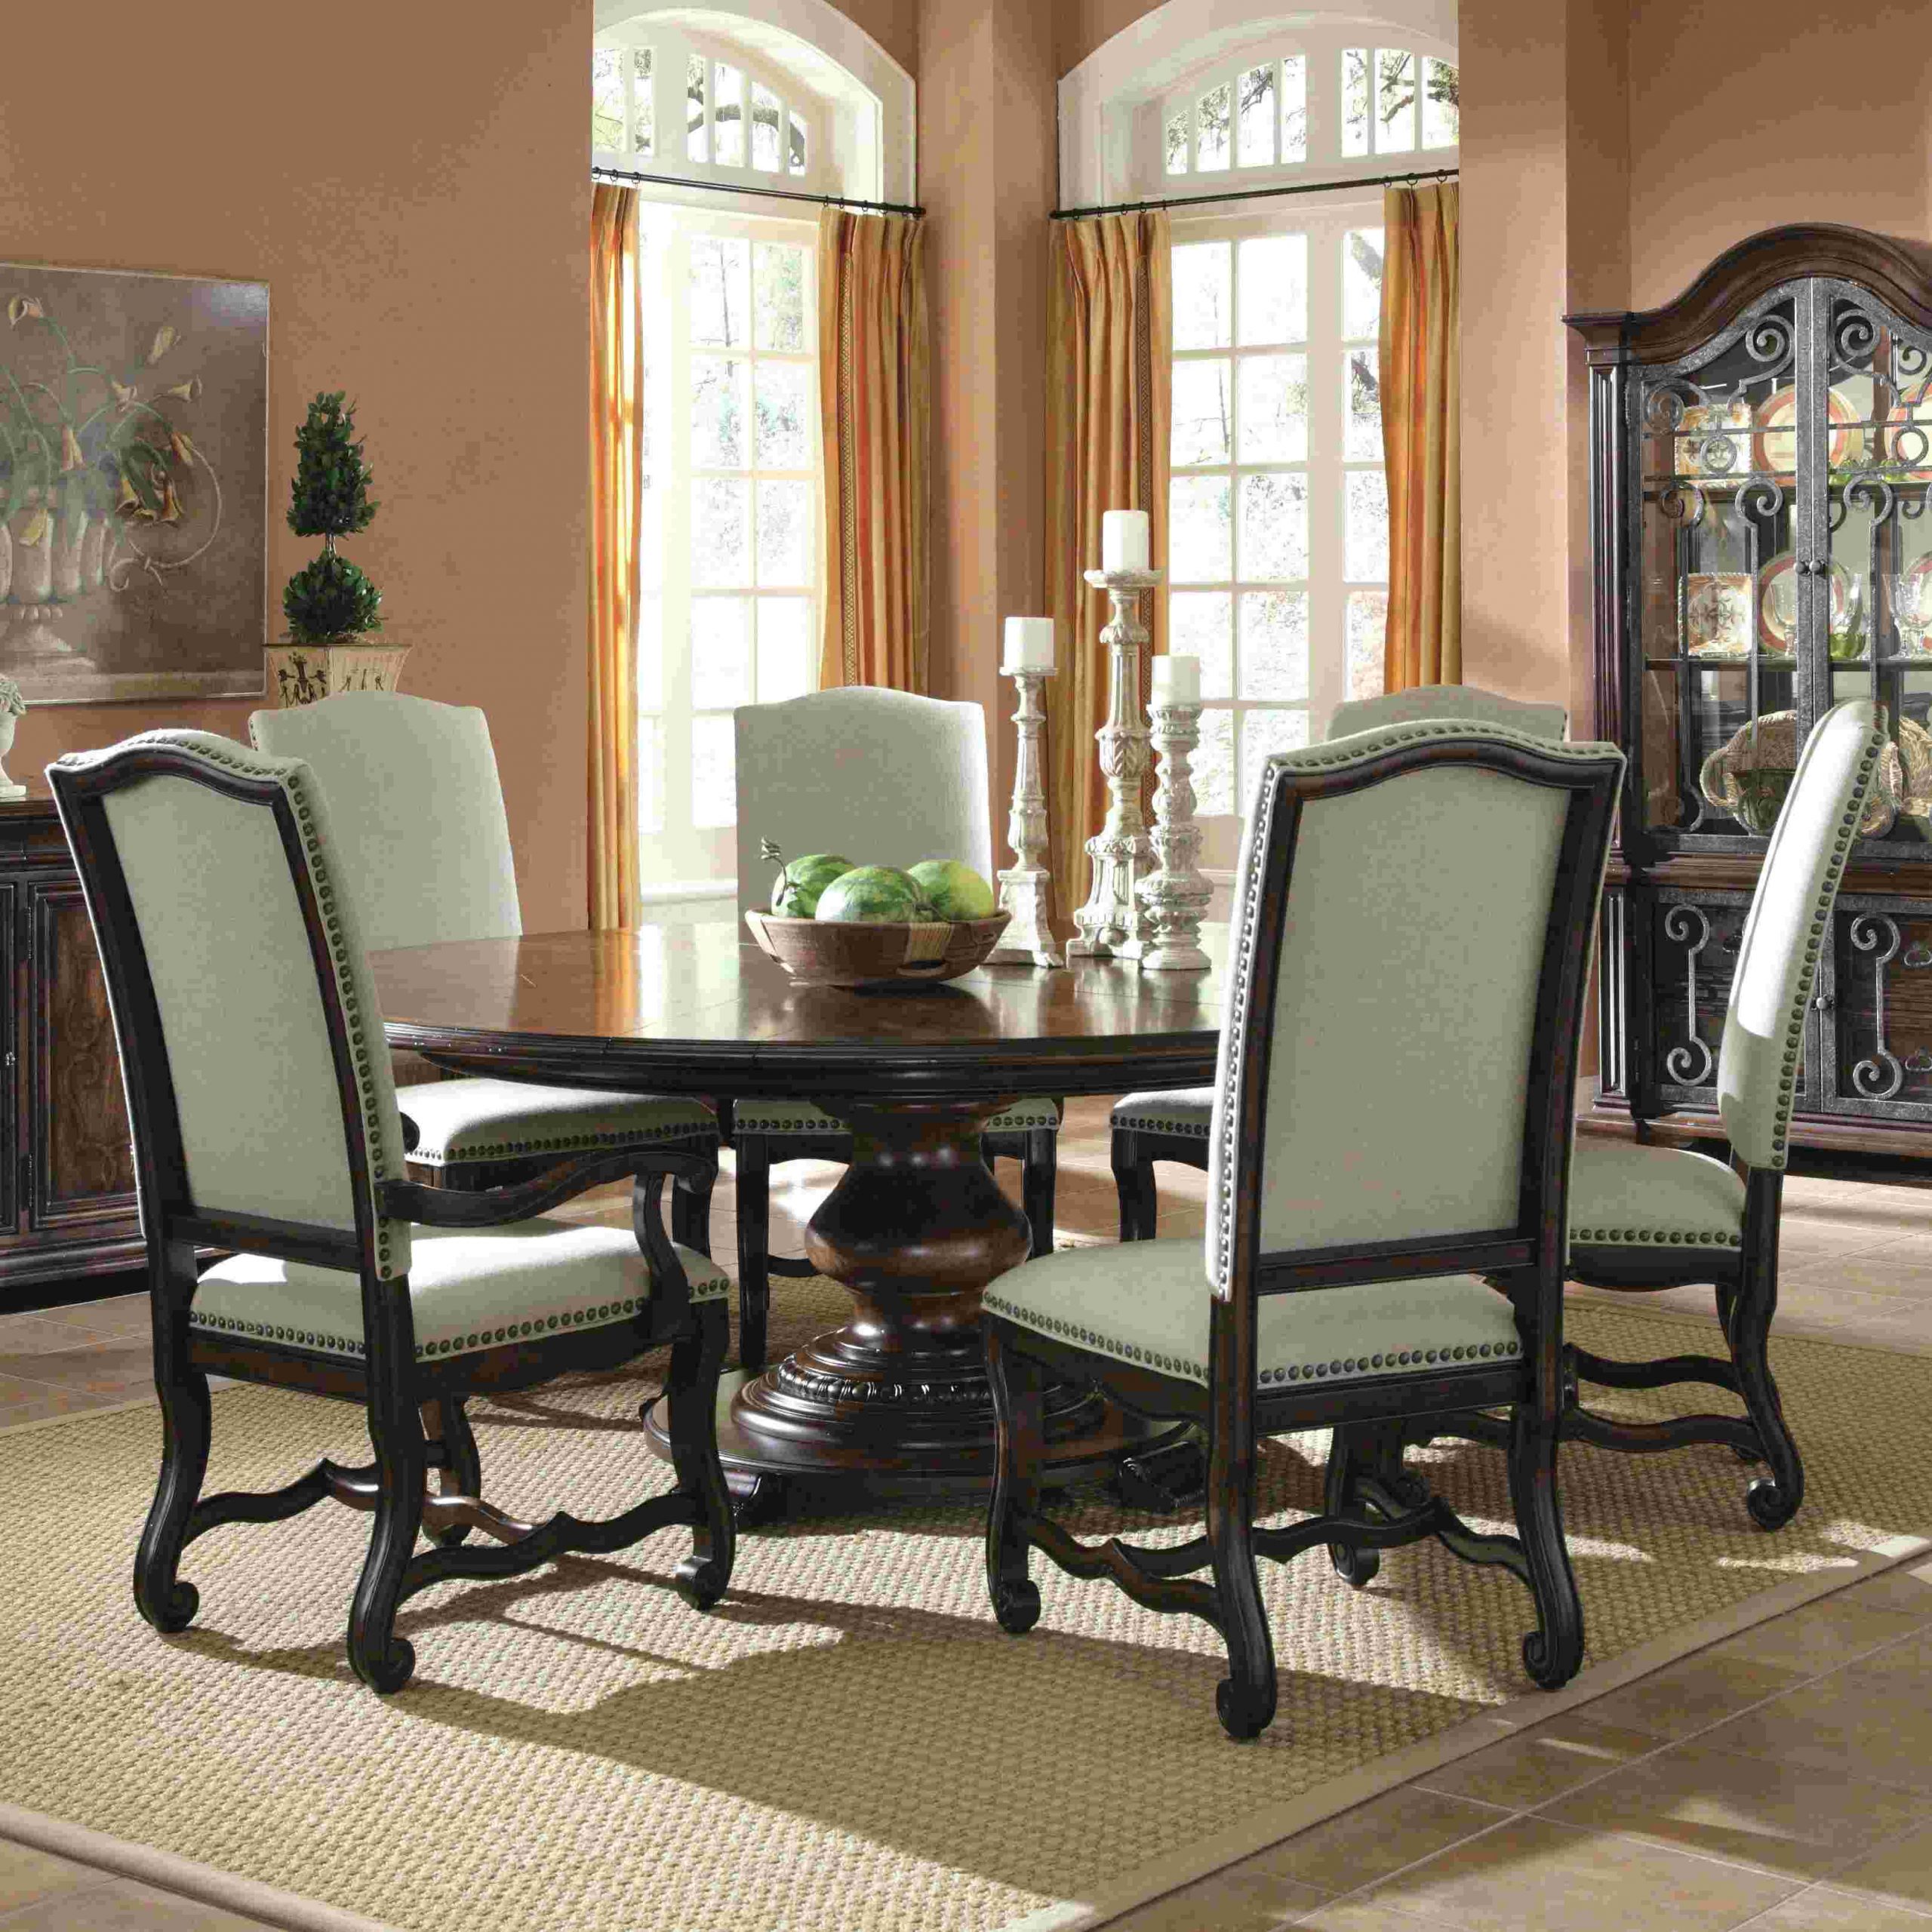 Dining Room Chairs Gumtree Cape Town Elegant Dining Room for dimensions 3221 X 3221